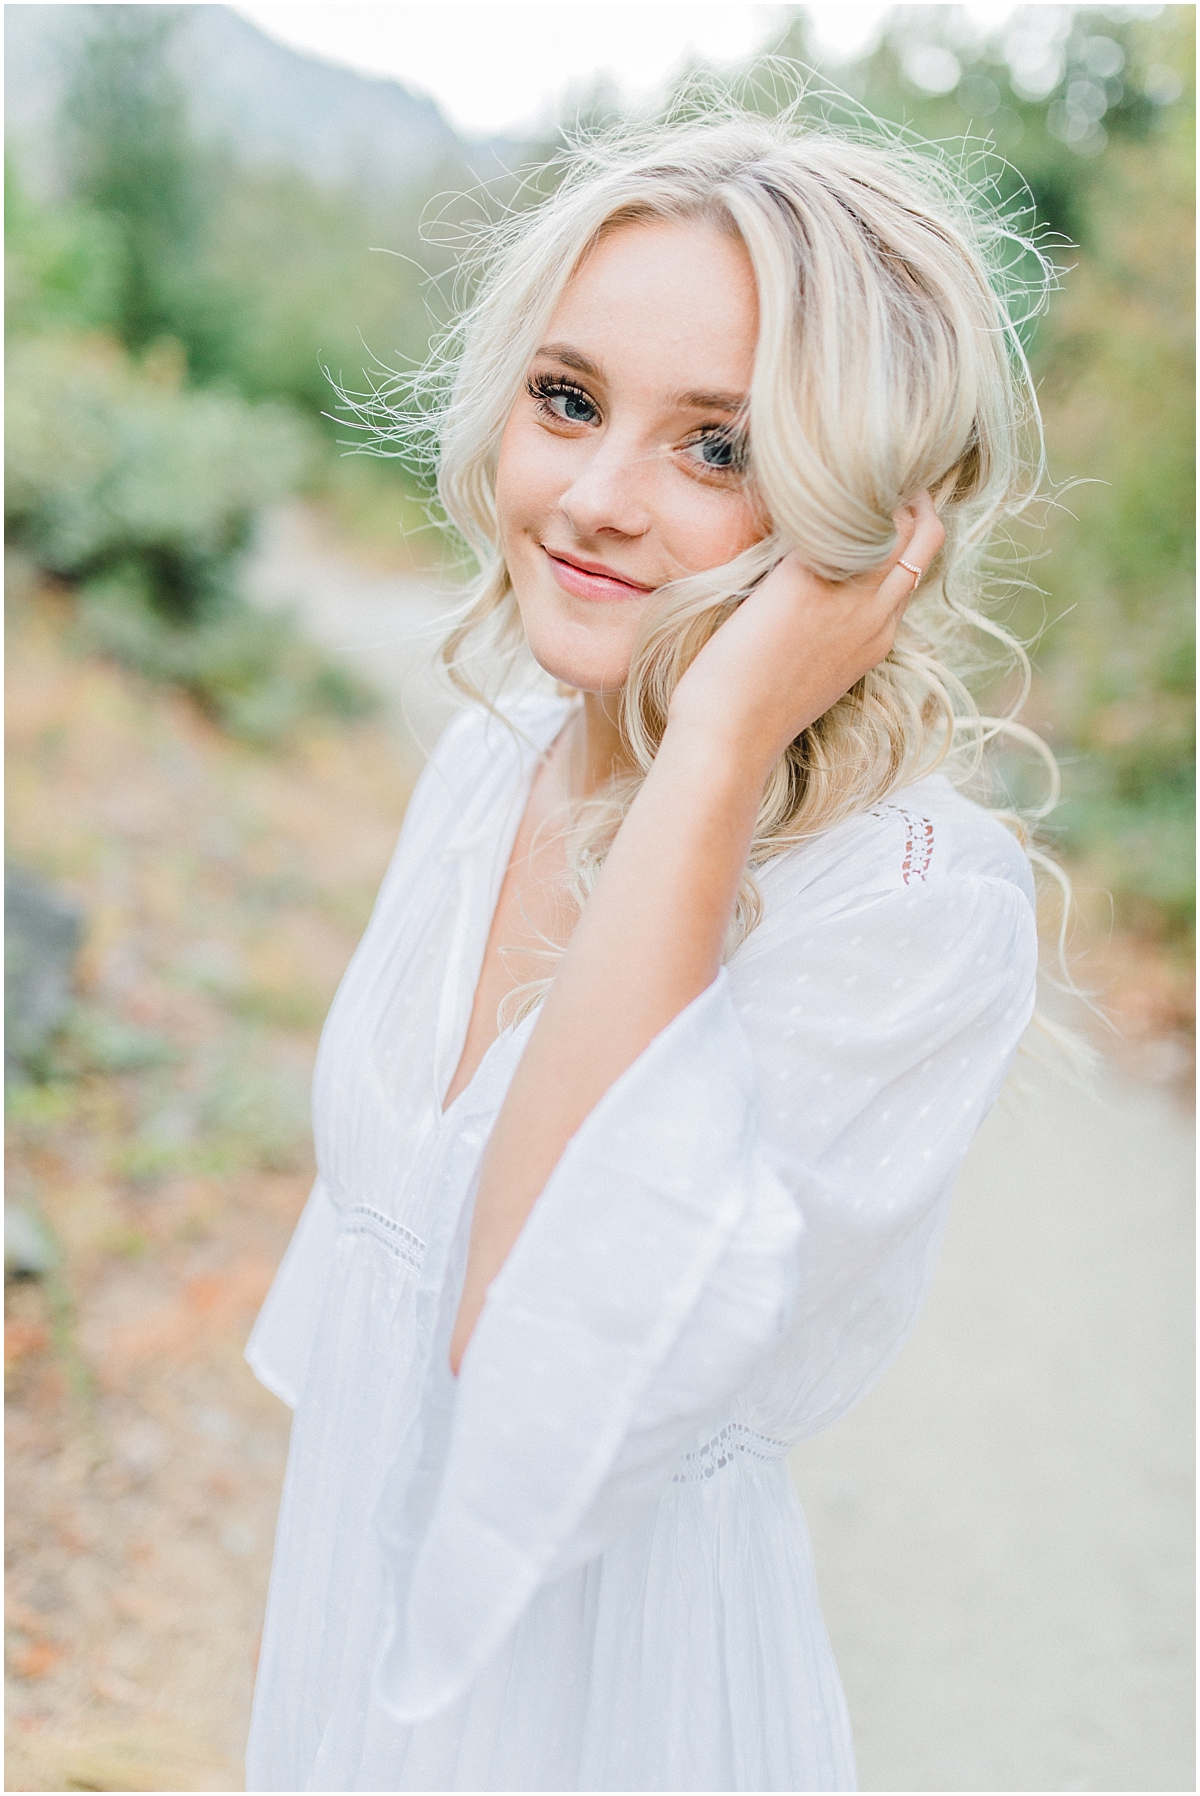 Emma Rose Company | Pacific Northwest Senior Portrait Photographer | Light and Airy Styled Senior Portraits | What to Wear to Senior Pictures | Kindred Presets | Seattle, Wenatchee and Portland Wedding and Portrait Photographer | Emma Rose27.jpg